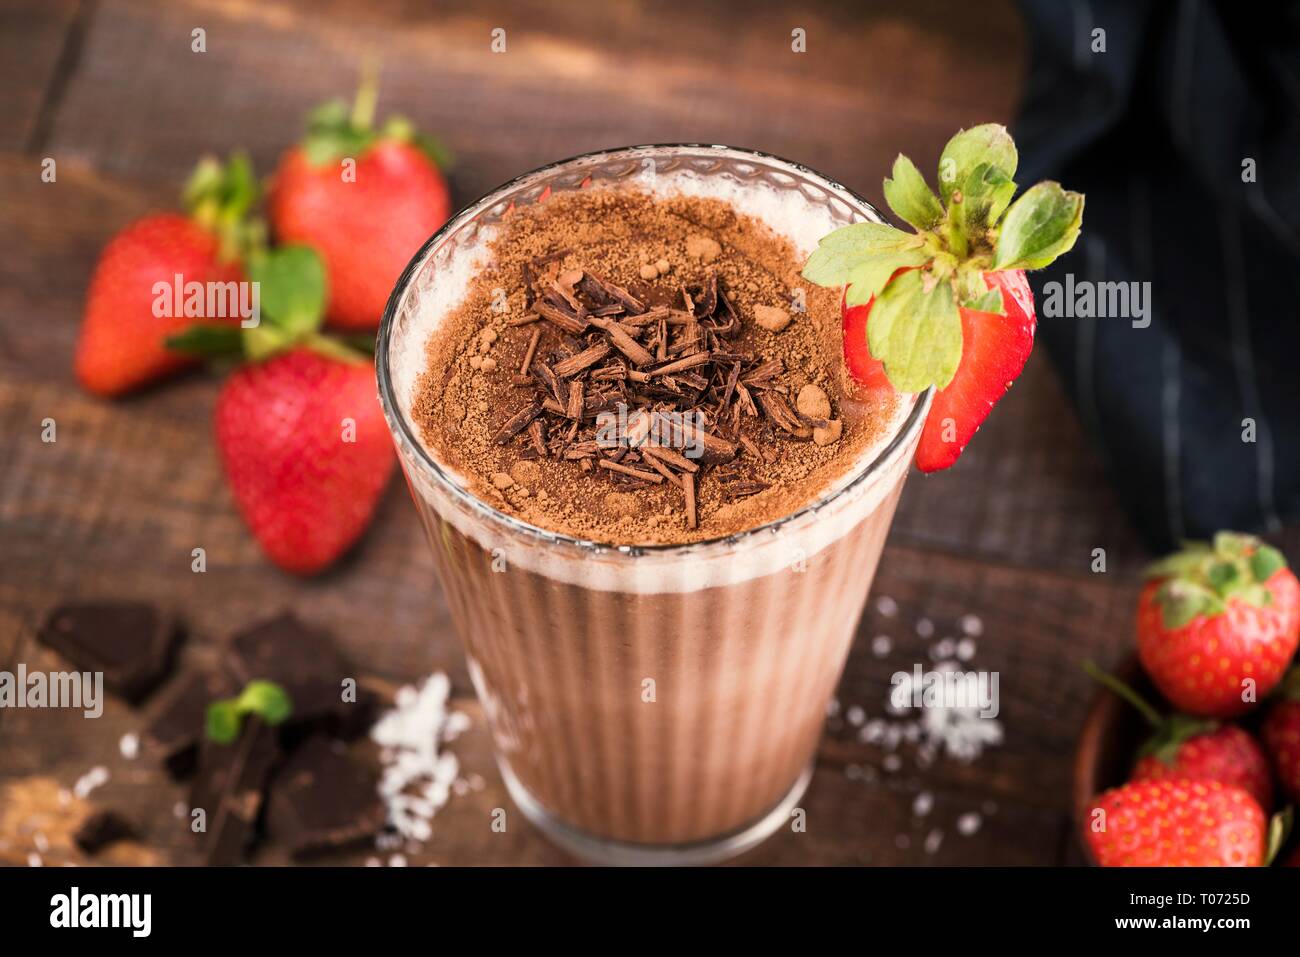 Strawberry Chocolate Milkshake With Chocolate Shavings, Cocoa In Tall Glass On Wooden Background. Closeup view, Selective focus Stock Photo